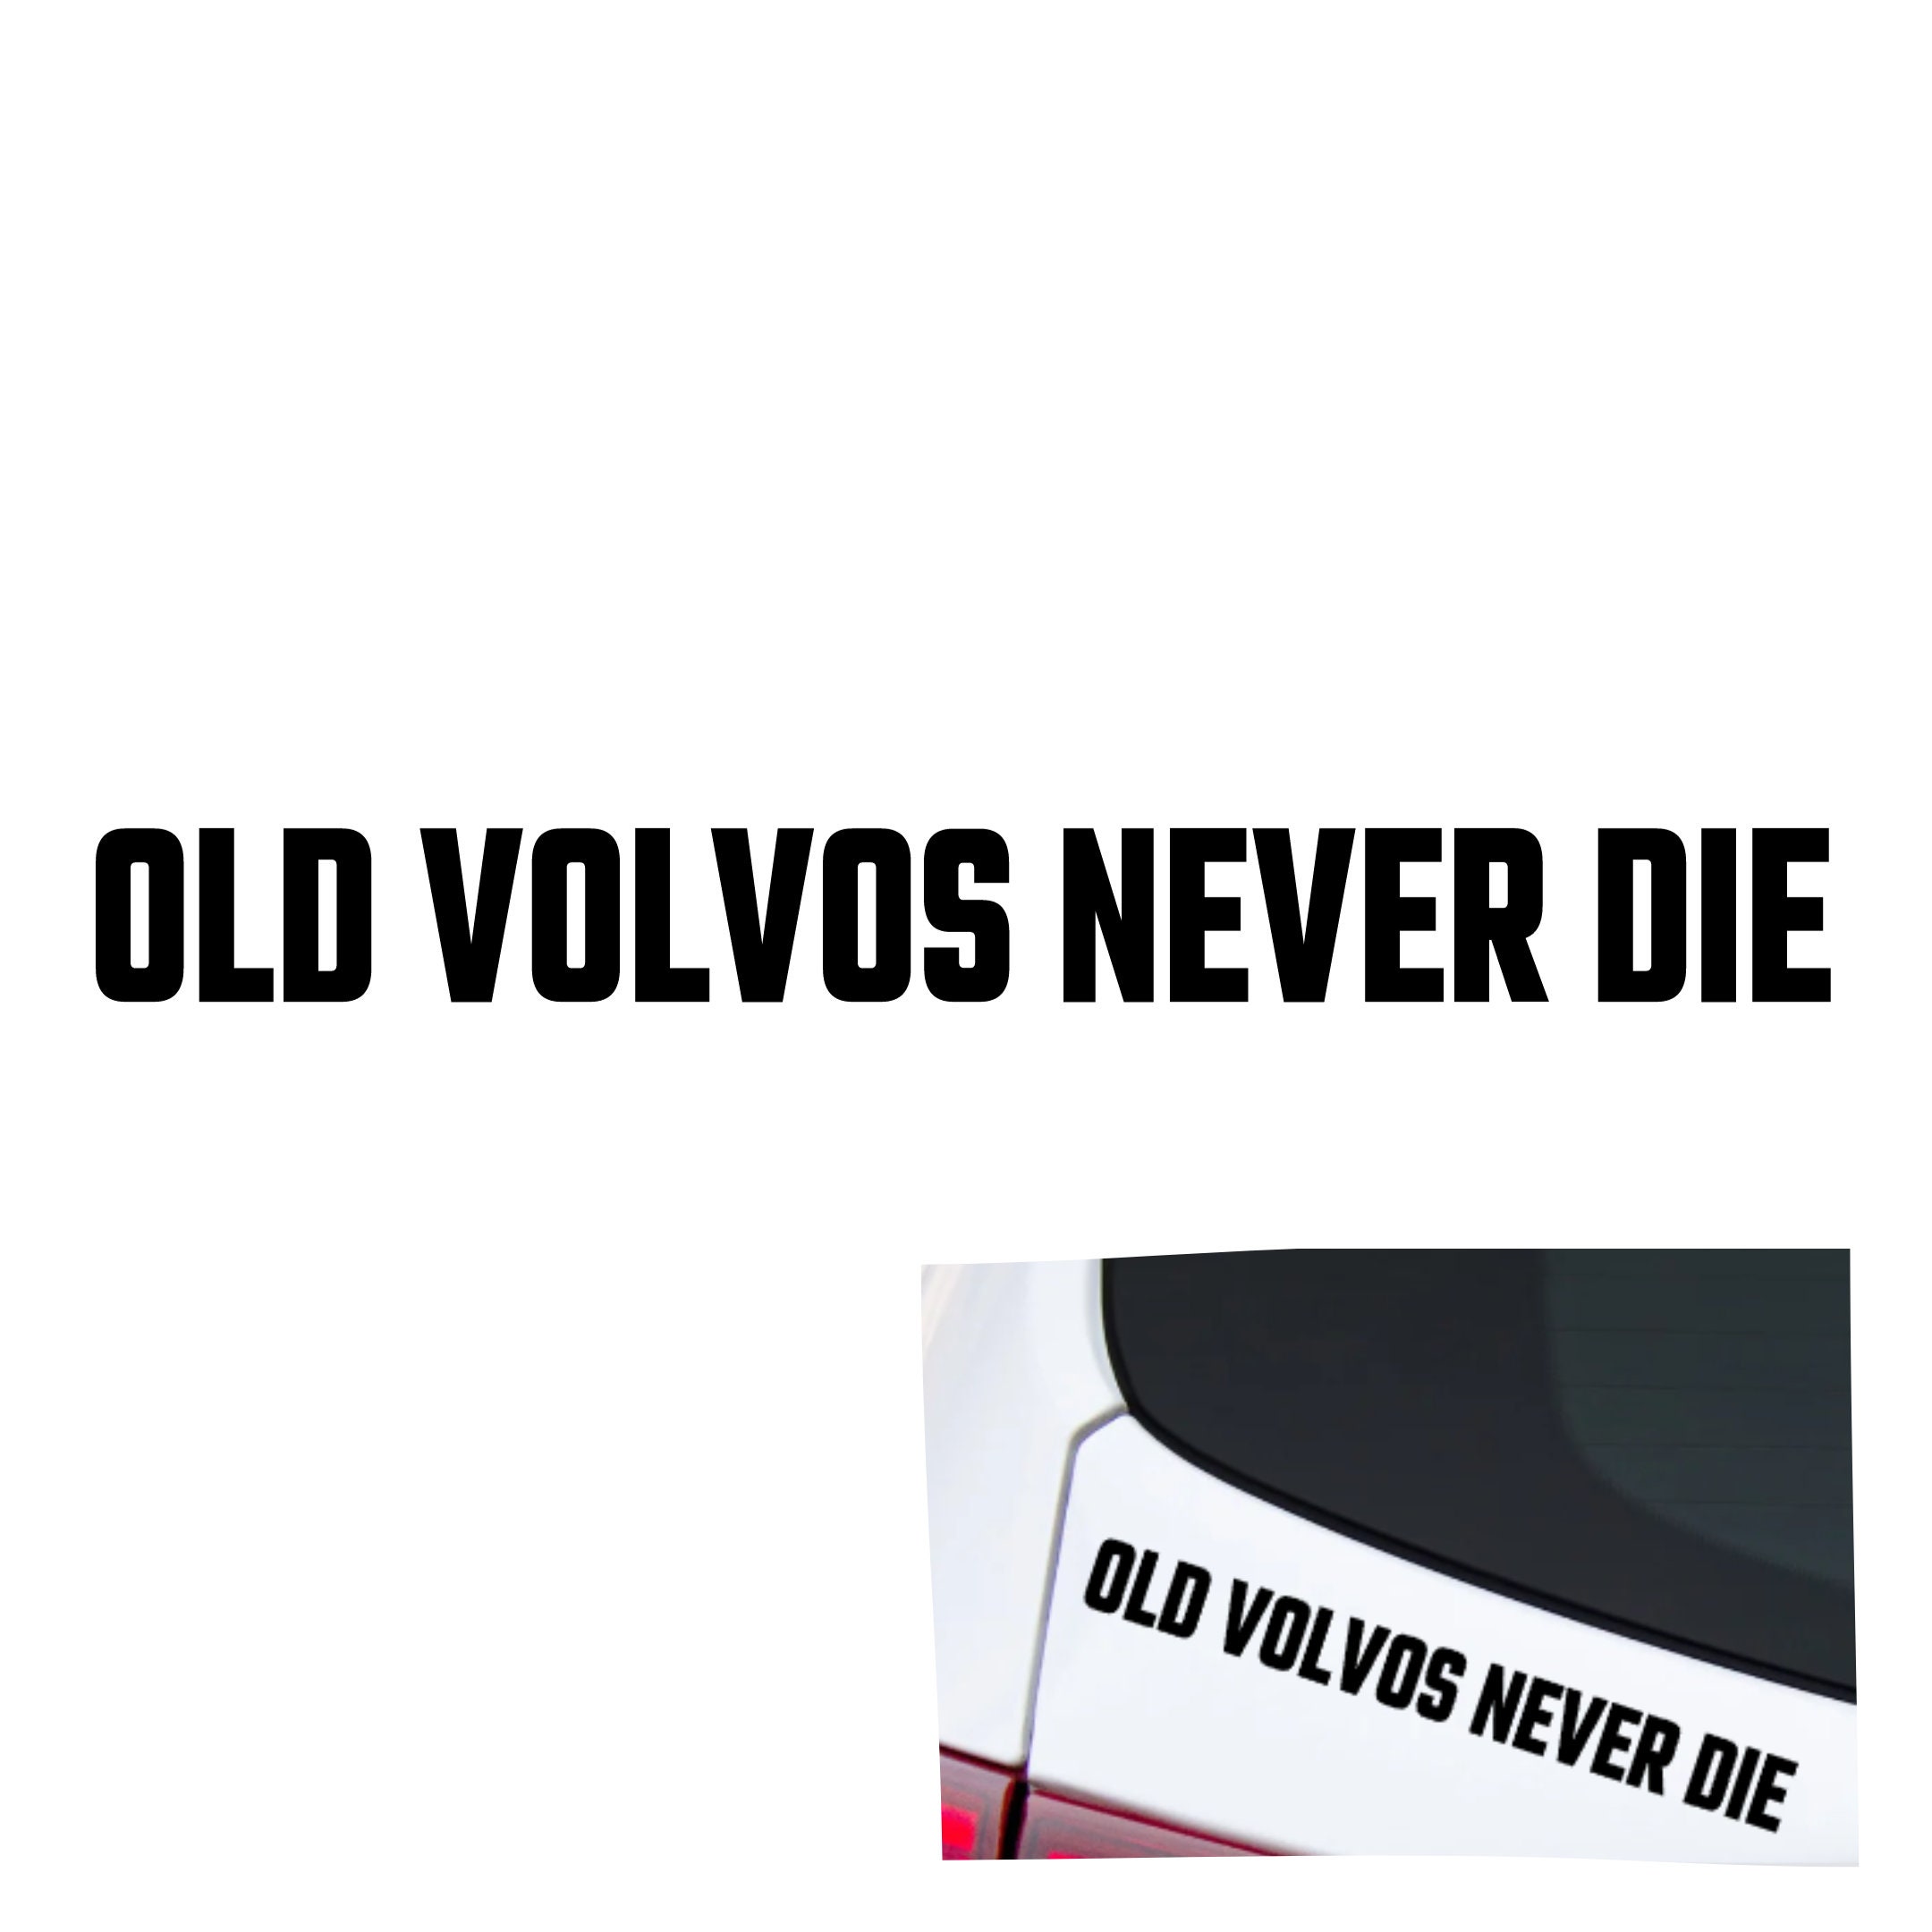 Old Volvos Never Die Vinyl Decal Volvo Funny Sticker Drift Rally Dub Stance  Classic Car Slap Swede Swedish the Volv 240 740 Wagen -  Finland